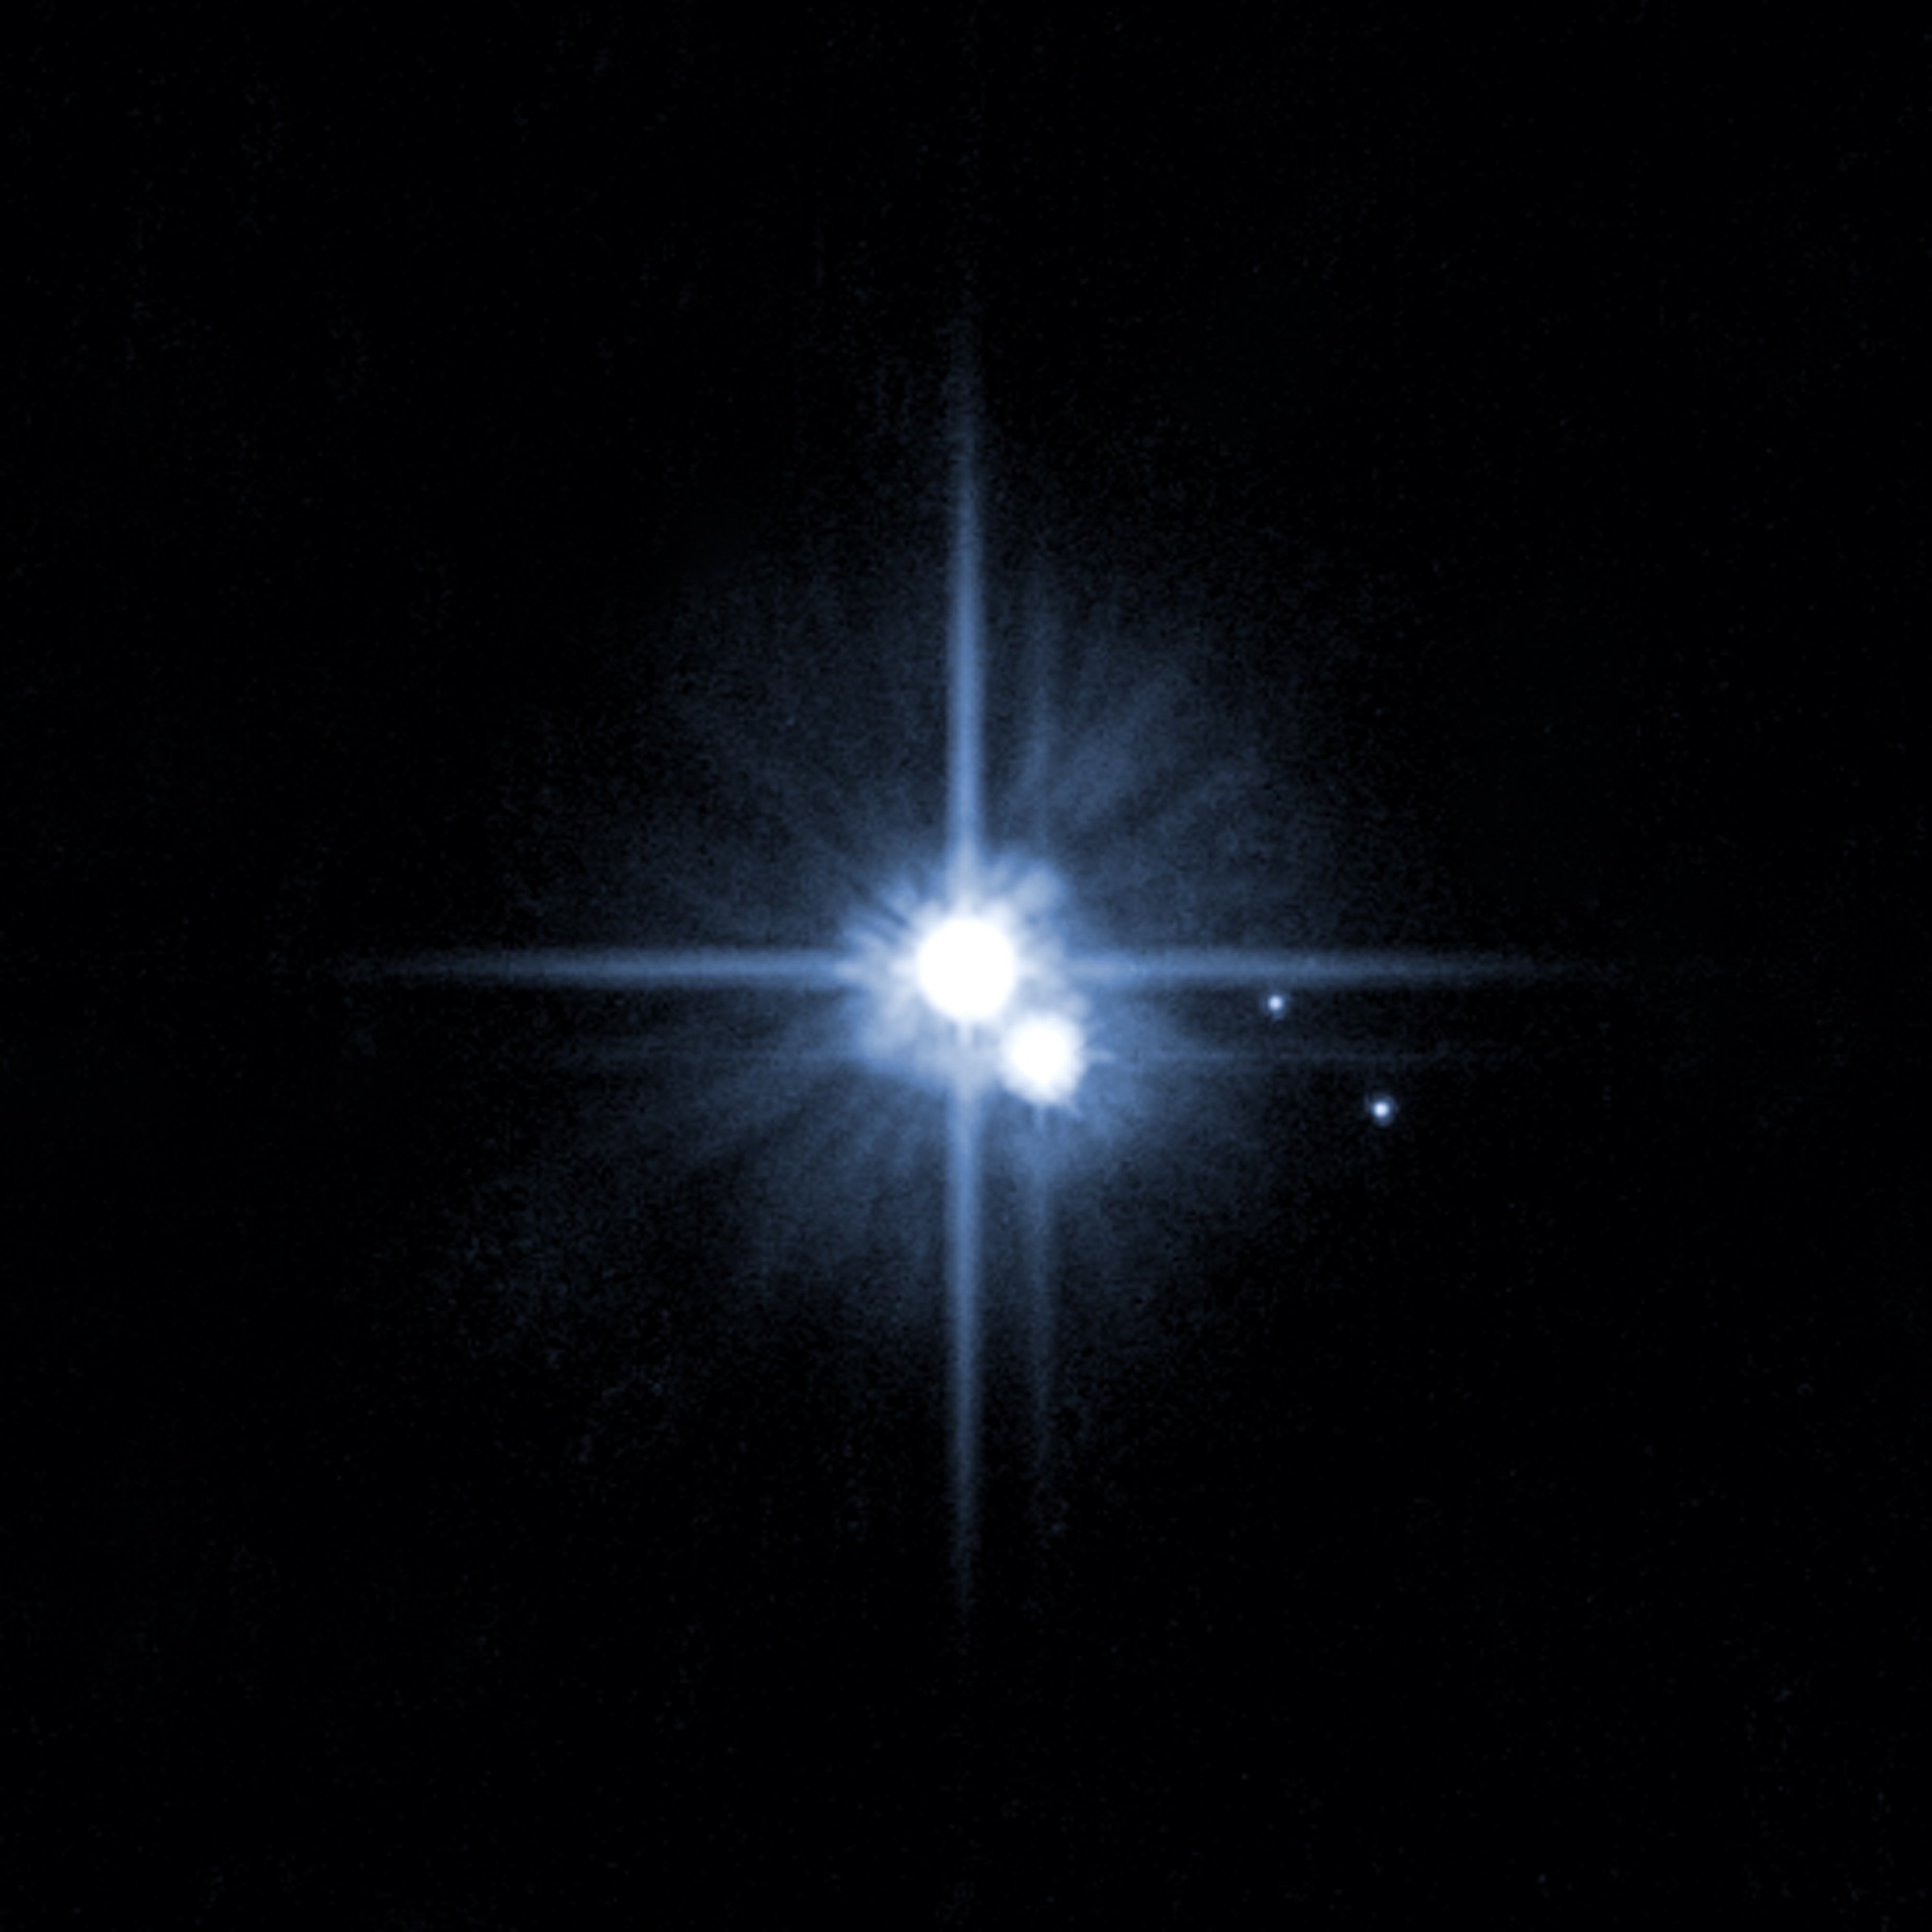 A pair of small moons orbiting pluto discovered by NASA's Hubble Space Telescope.